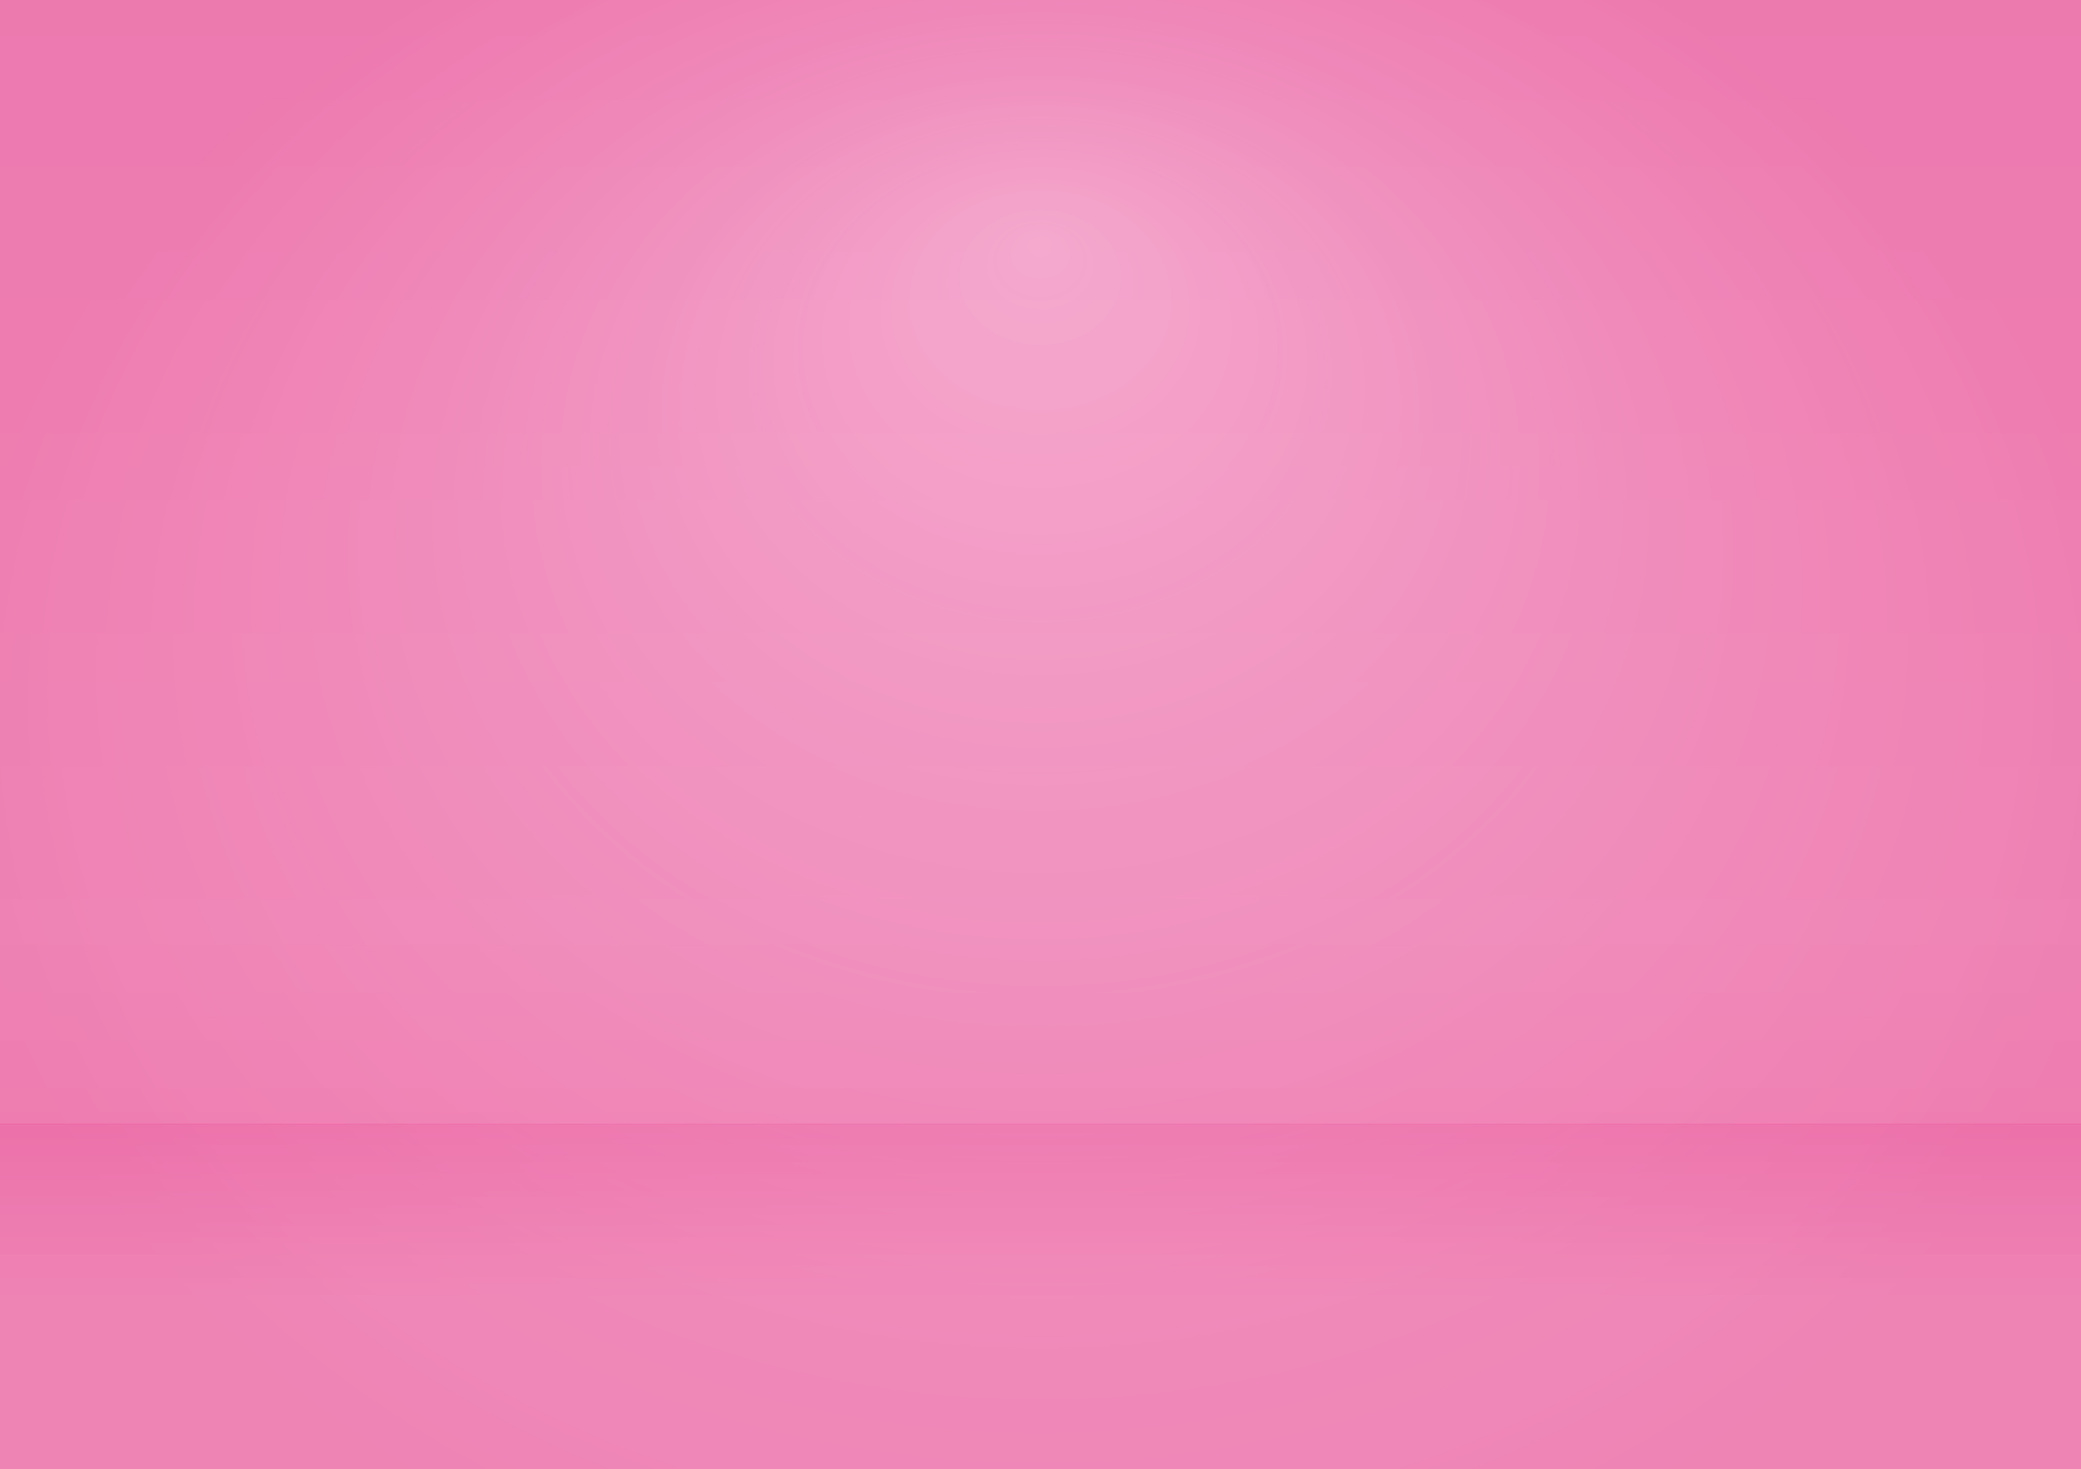 Empty room background pink color